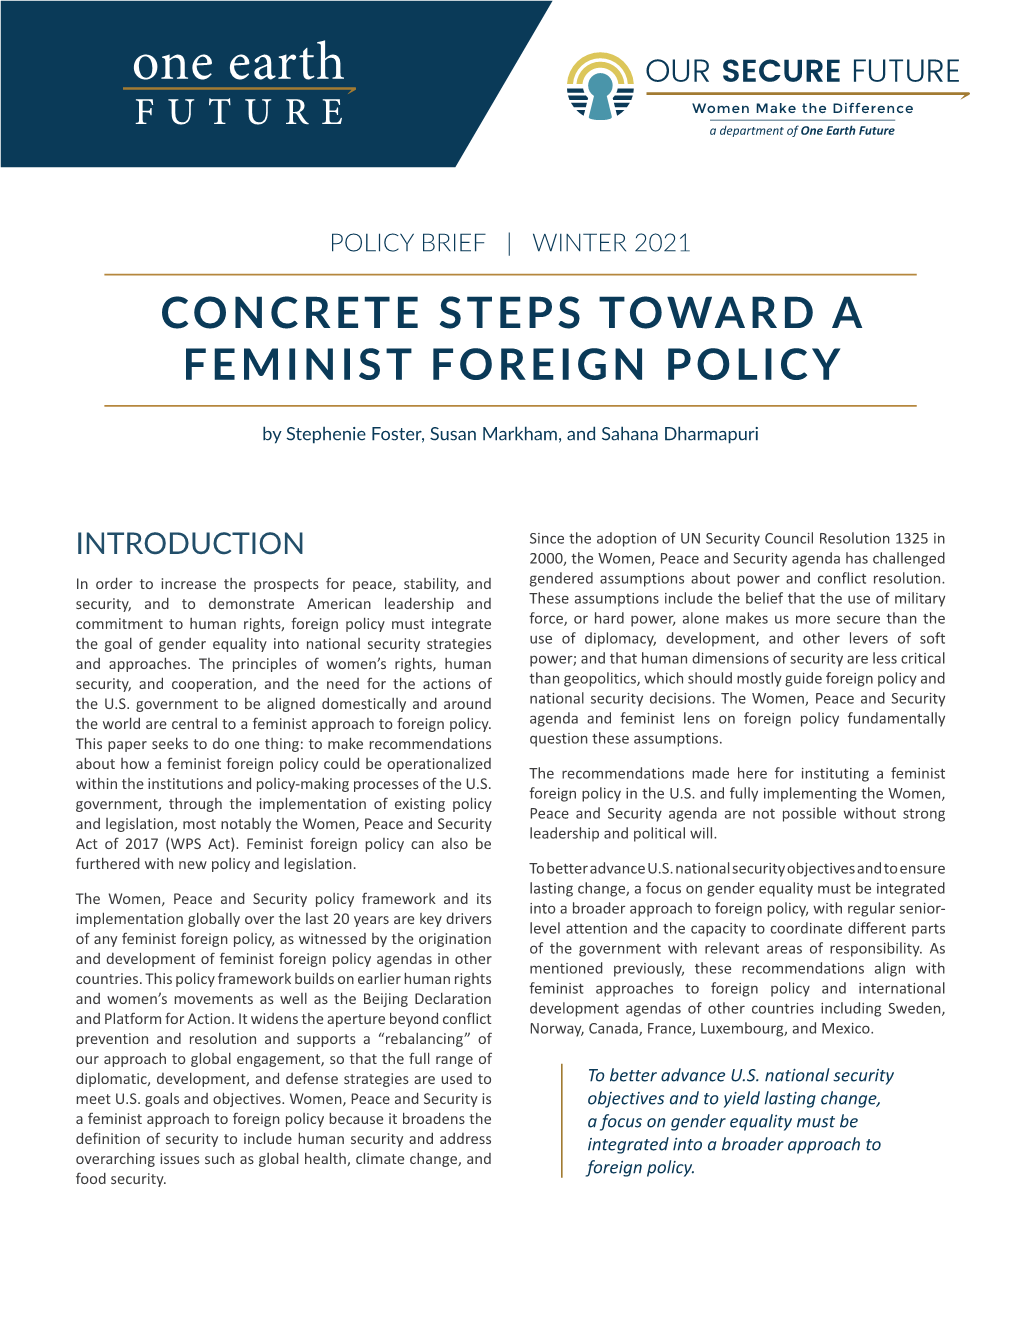 Concrete Steps Toward a Feminist Foreign Policy